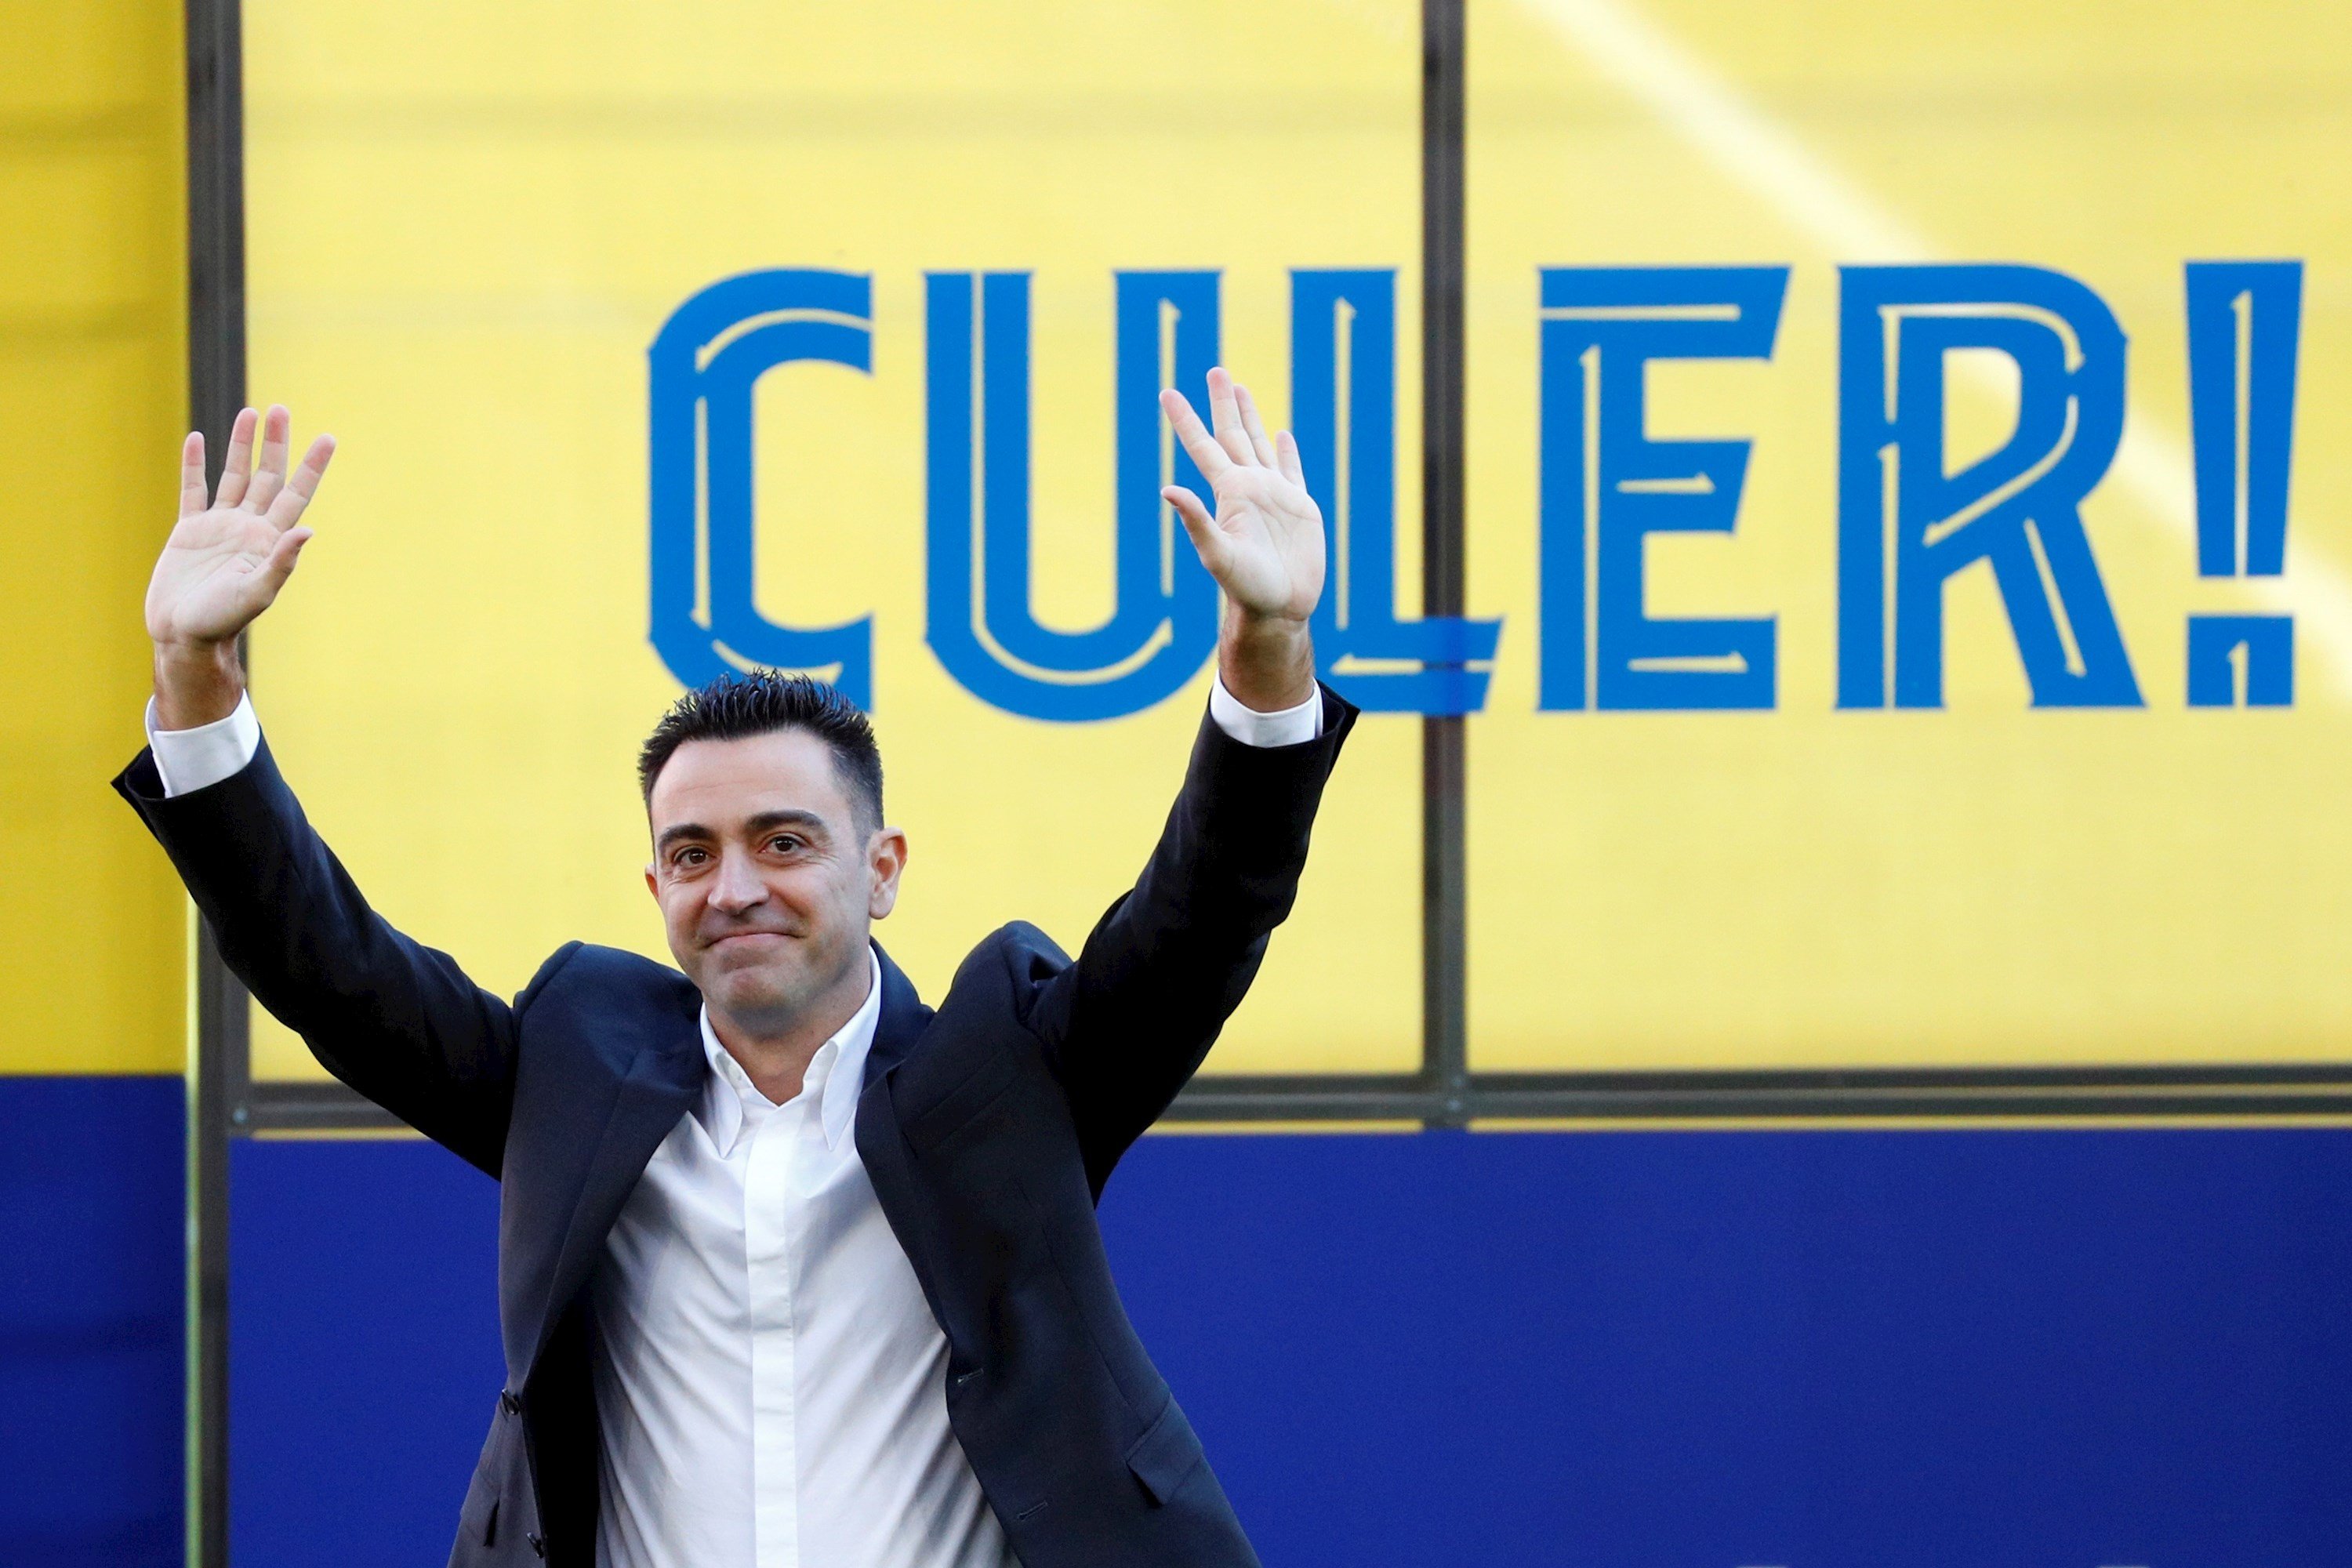 Xavi Hernández begins a new era at Barça with "enthusiasm, order and rules"